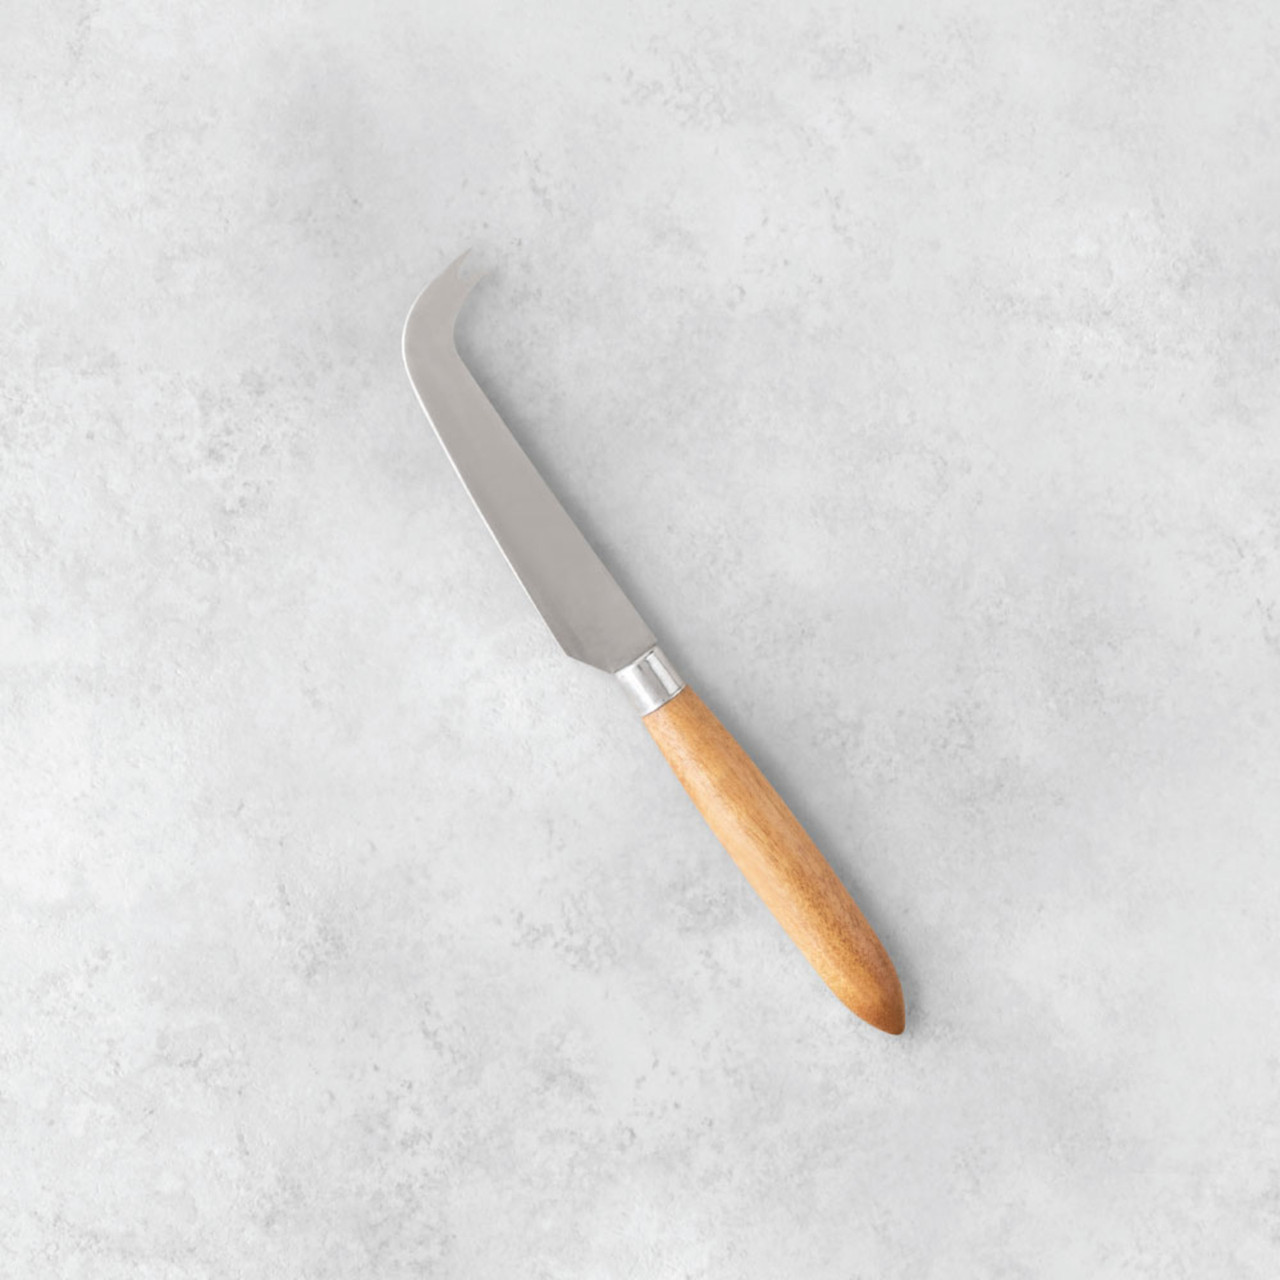 Hard Cheese Knife by Twine®